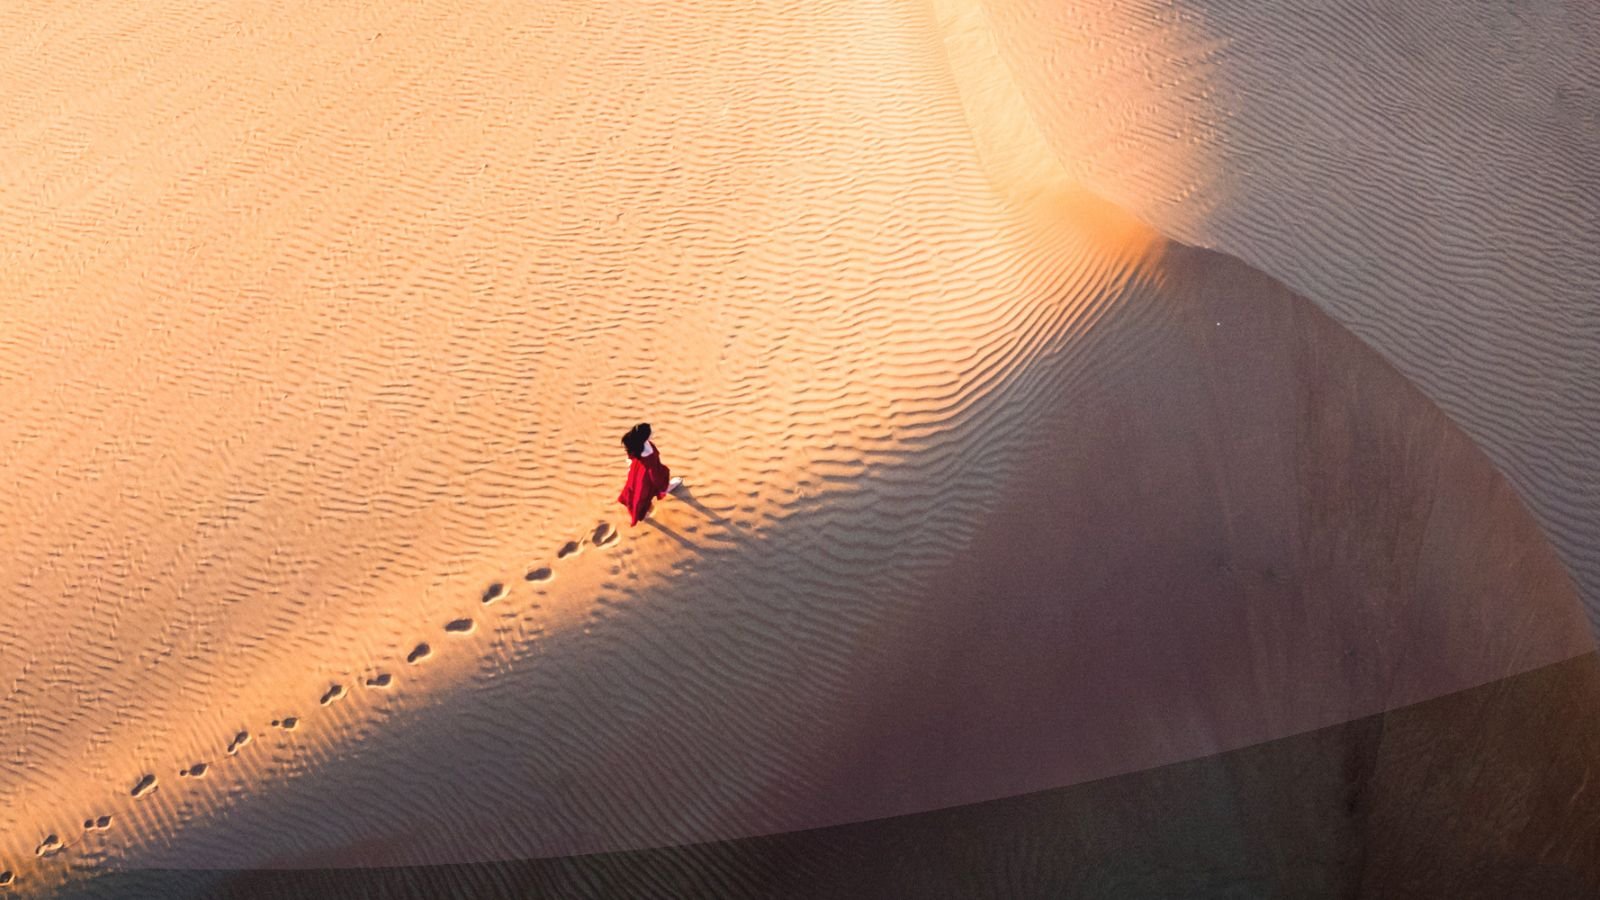 Woman walking in the desert during sunset aerial view.